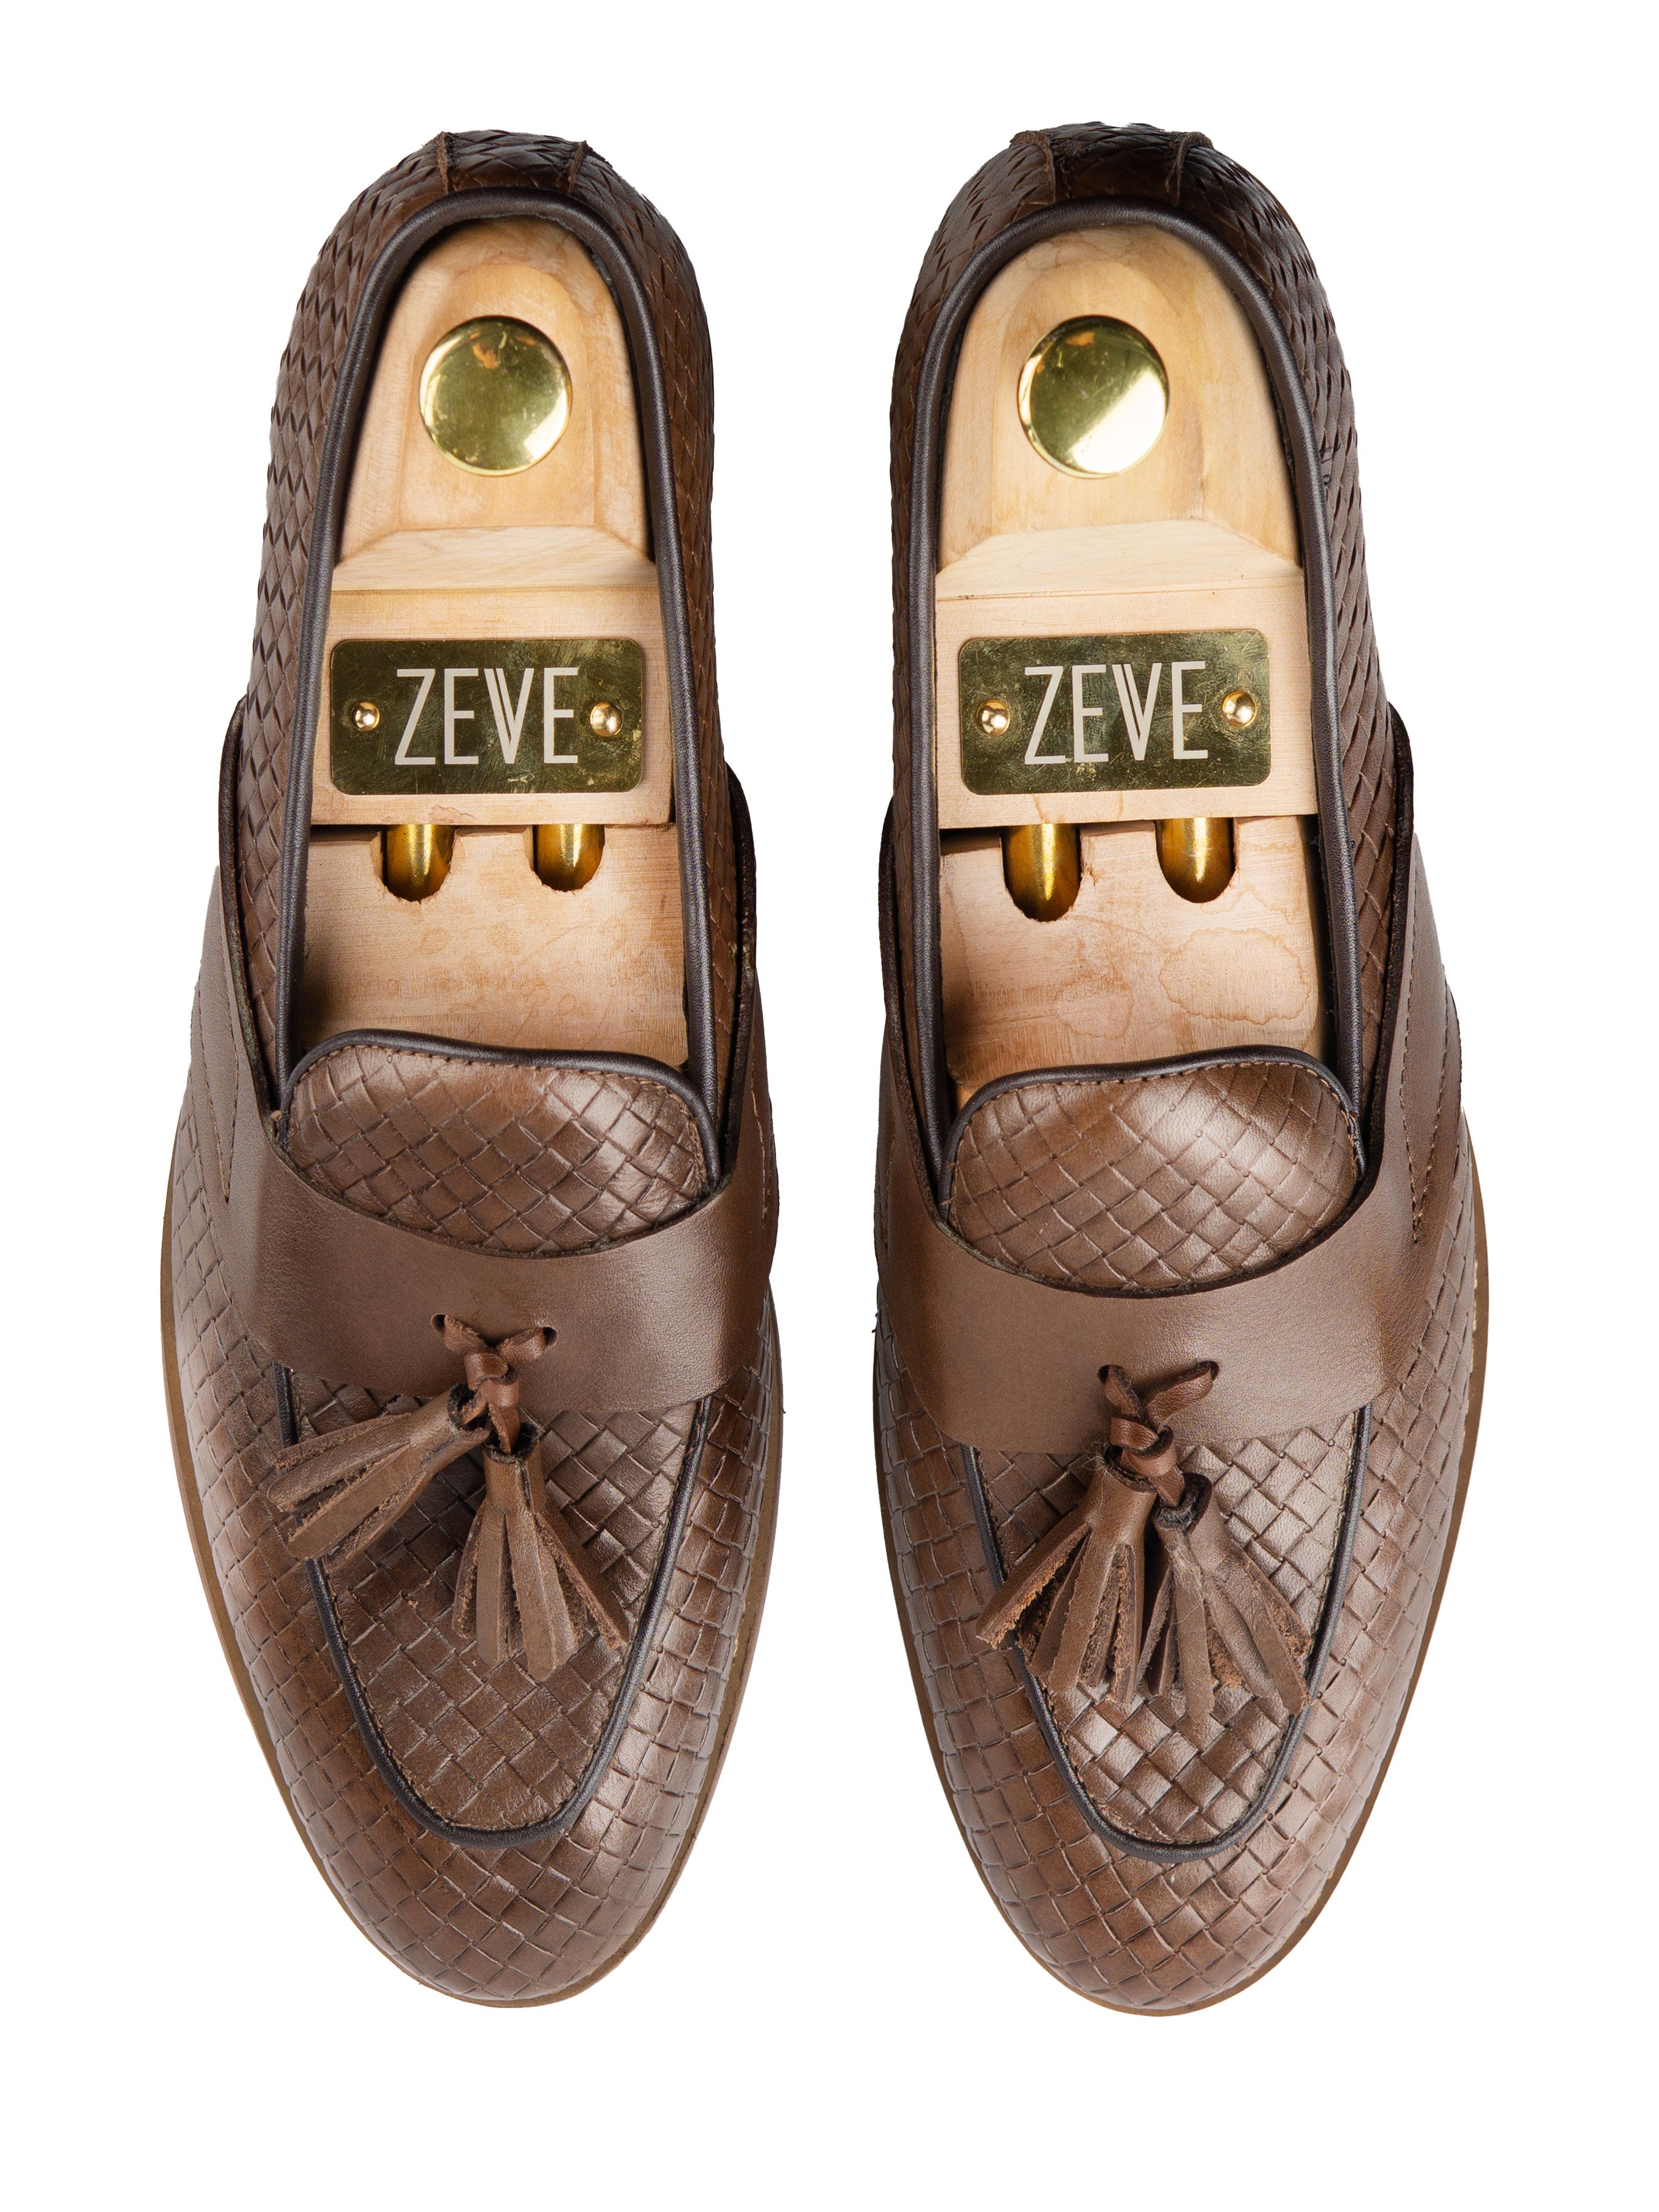 Belgian Loafer Tassel - Coffee Woven Leather with Solid Strap - Zeve Shoes